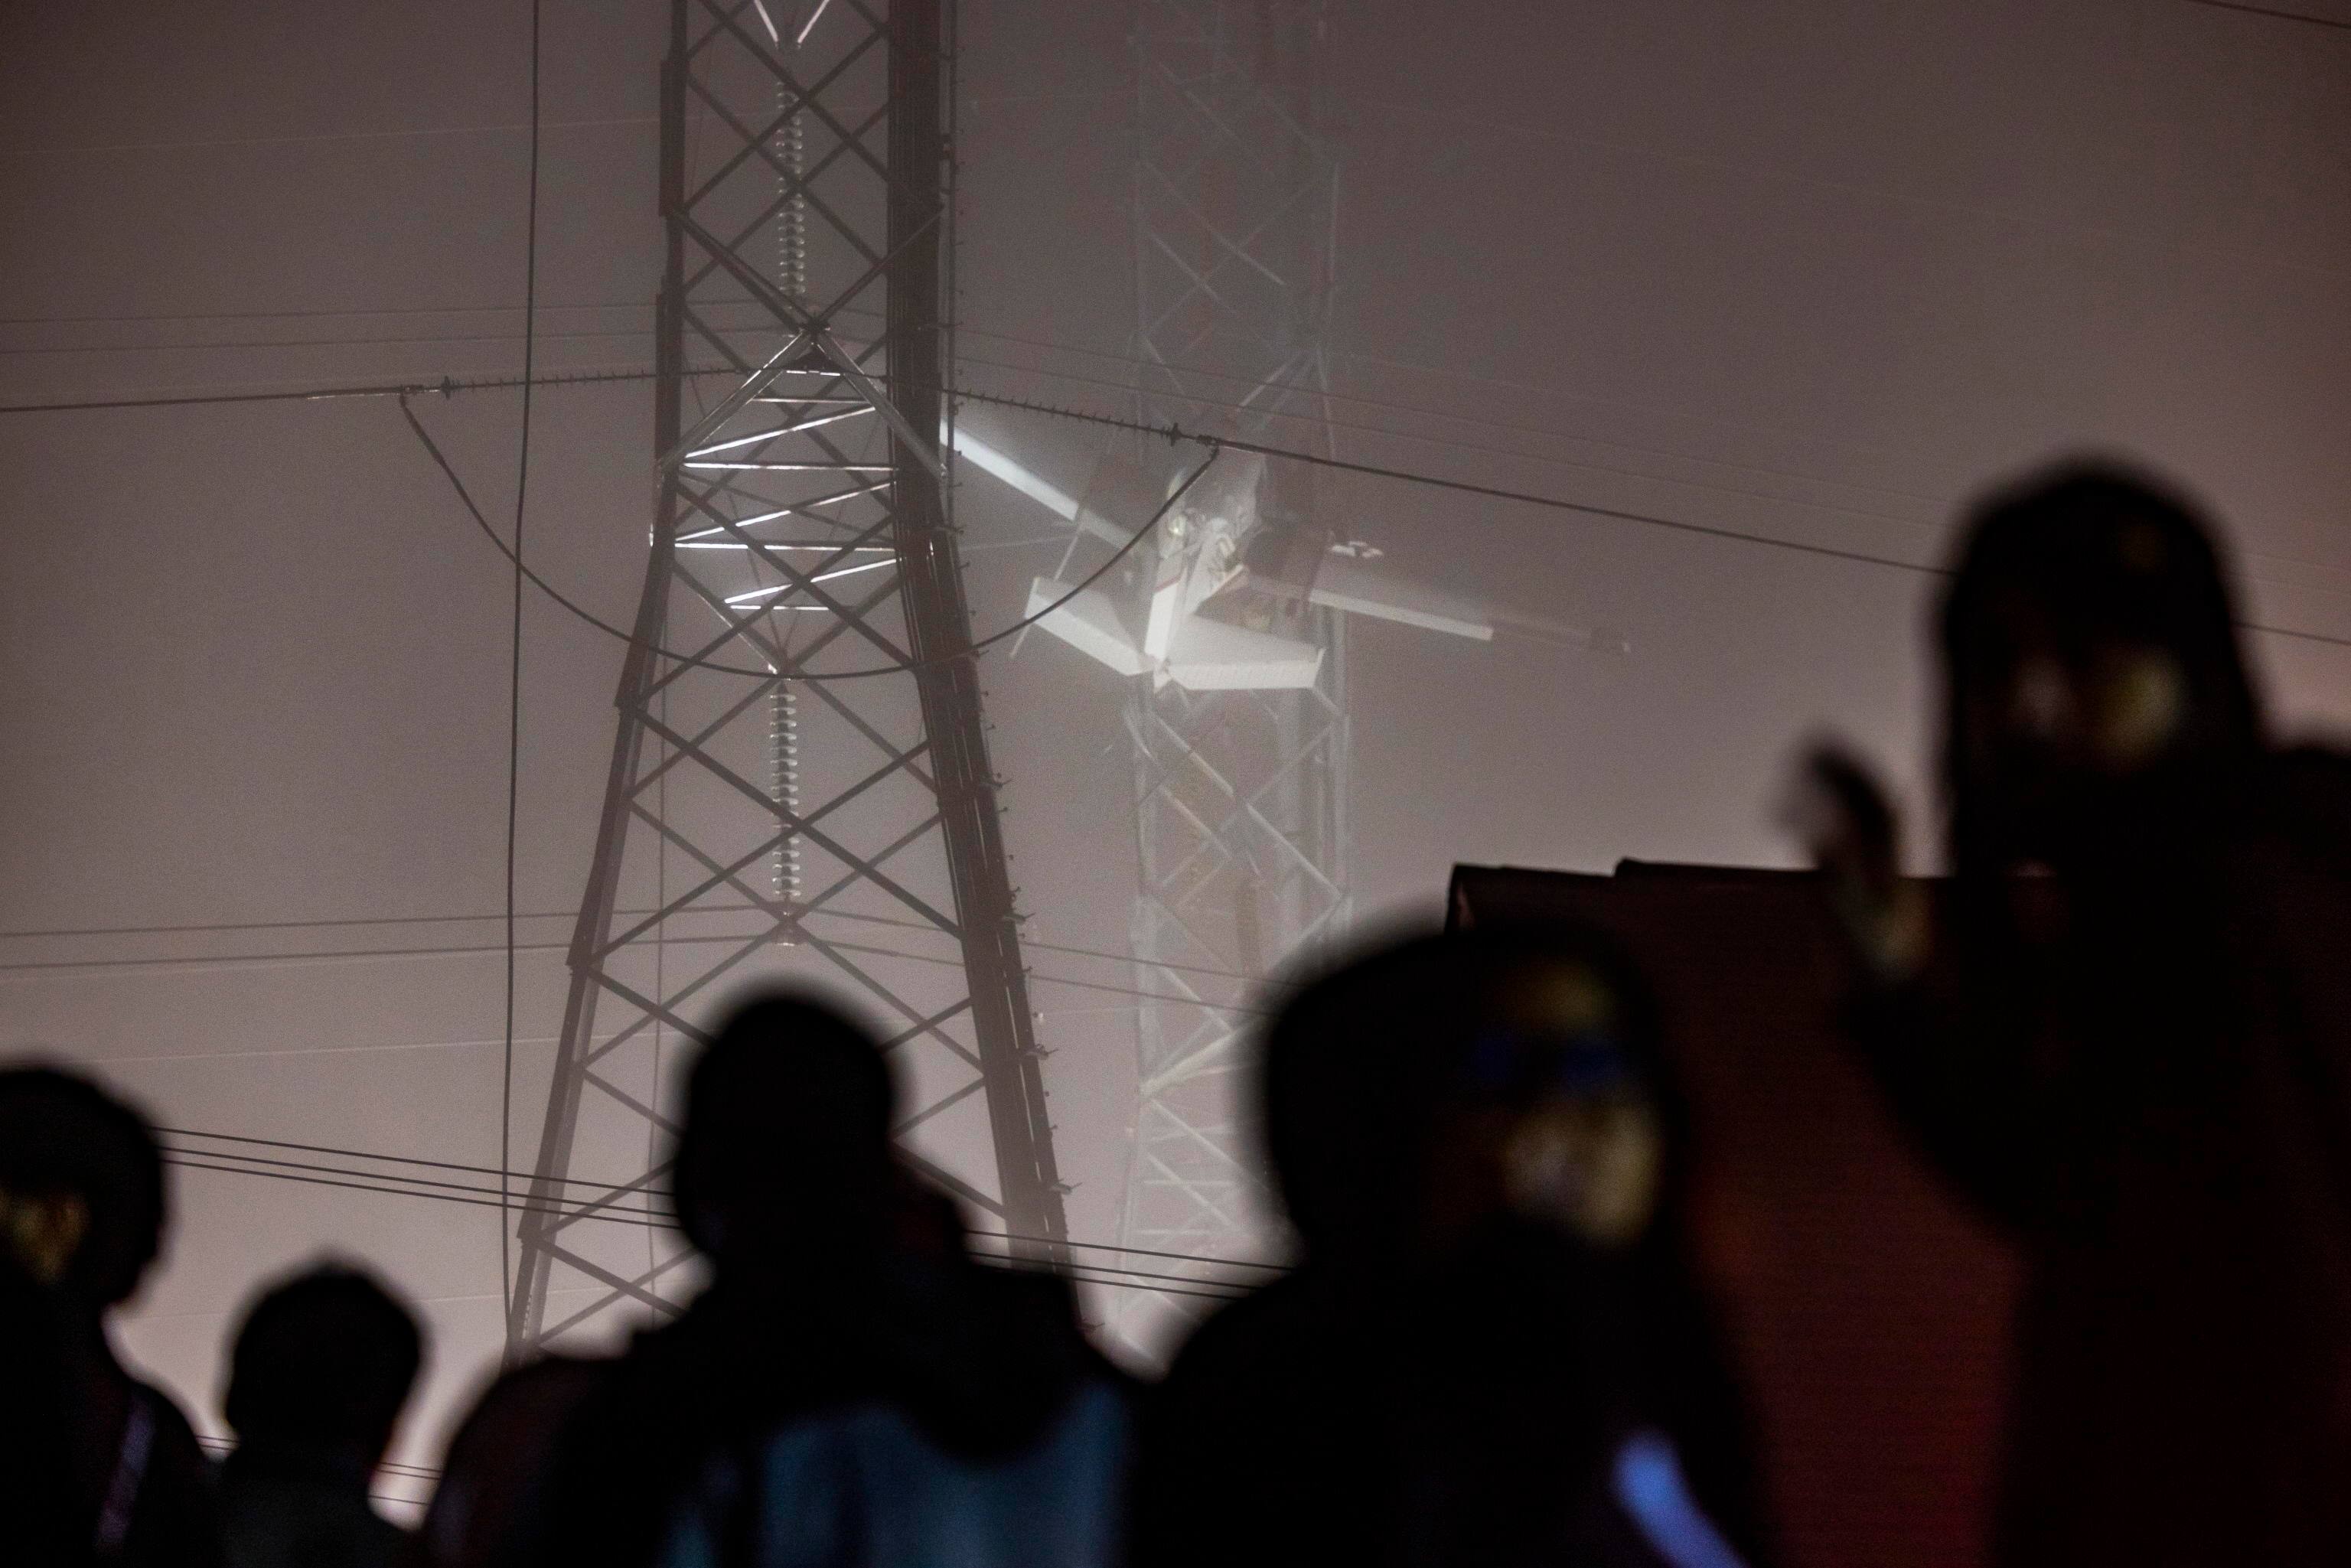 epa10333584 People watch a small plane that crashed into a power line, knocking out electricity for tens of thousands of residents, in Gaithersburg, Maryland, USA, 28 November 2022.  EPA/JIM LO SCALZO